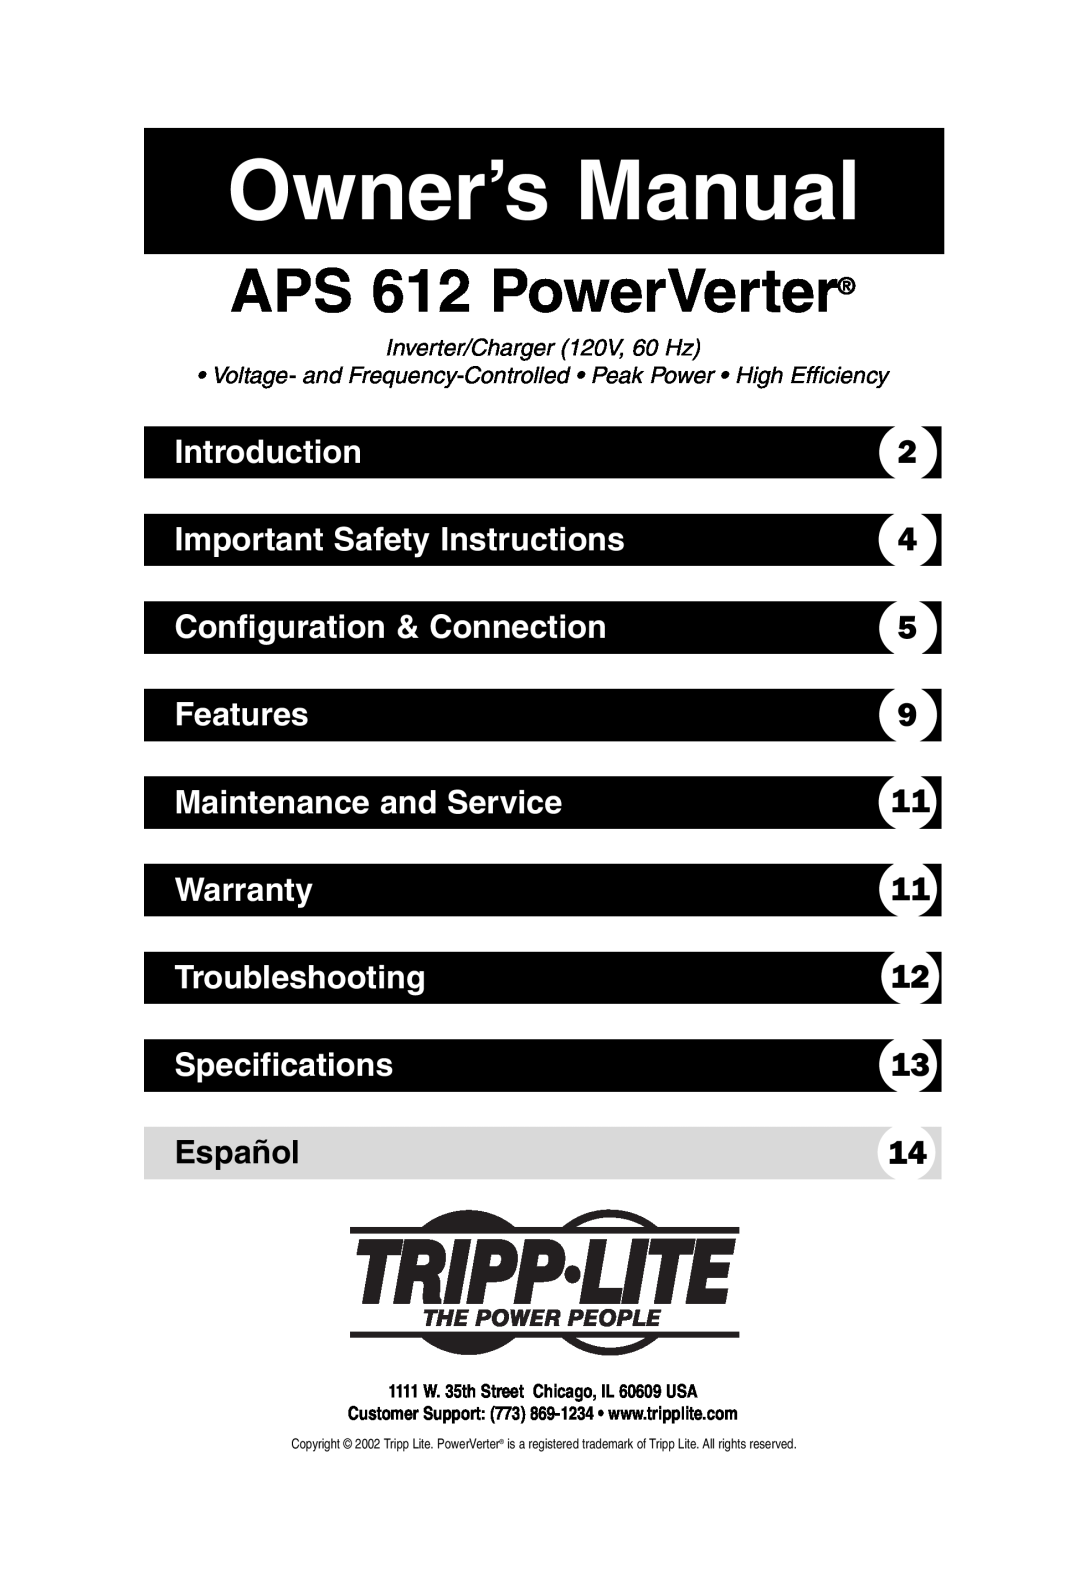 Tripp Lite owner manual APS 612 PowerVerter, Introduction, Important Safety Instructions, Configuration & Connection 